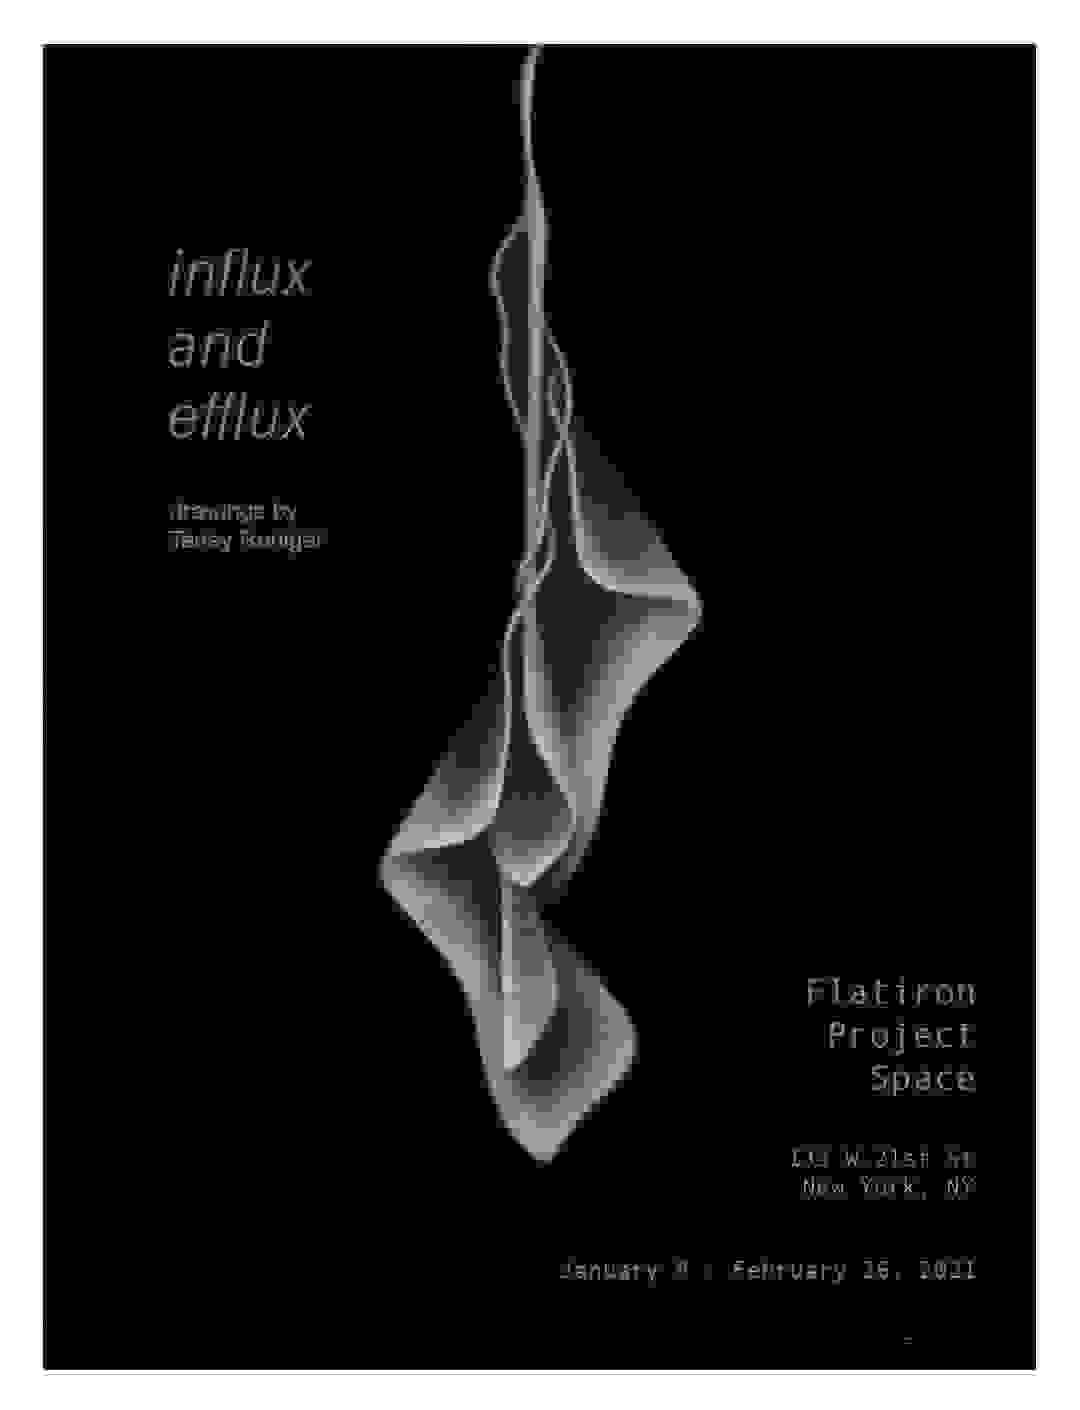 Event poster for "Influx and Efflux: Drawings by Taney Roniger." It features the title, location, and dates, written in white on black background. In the middle, there is a structure that looks like a dress or flower petals draped down a pole